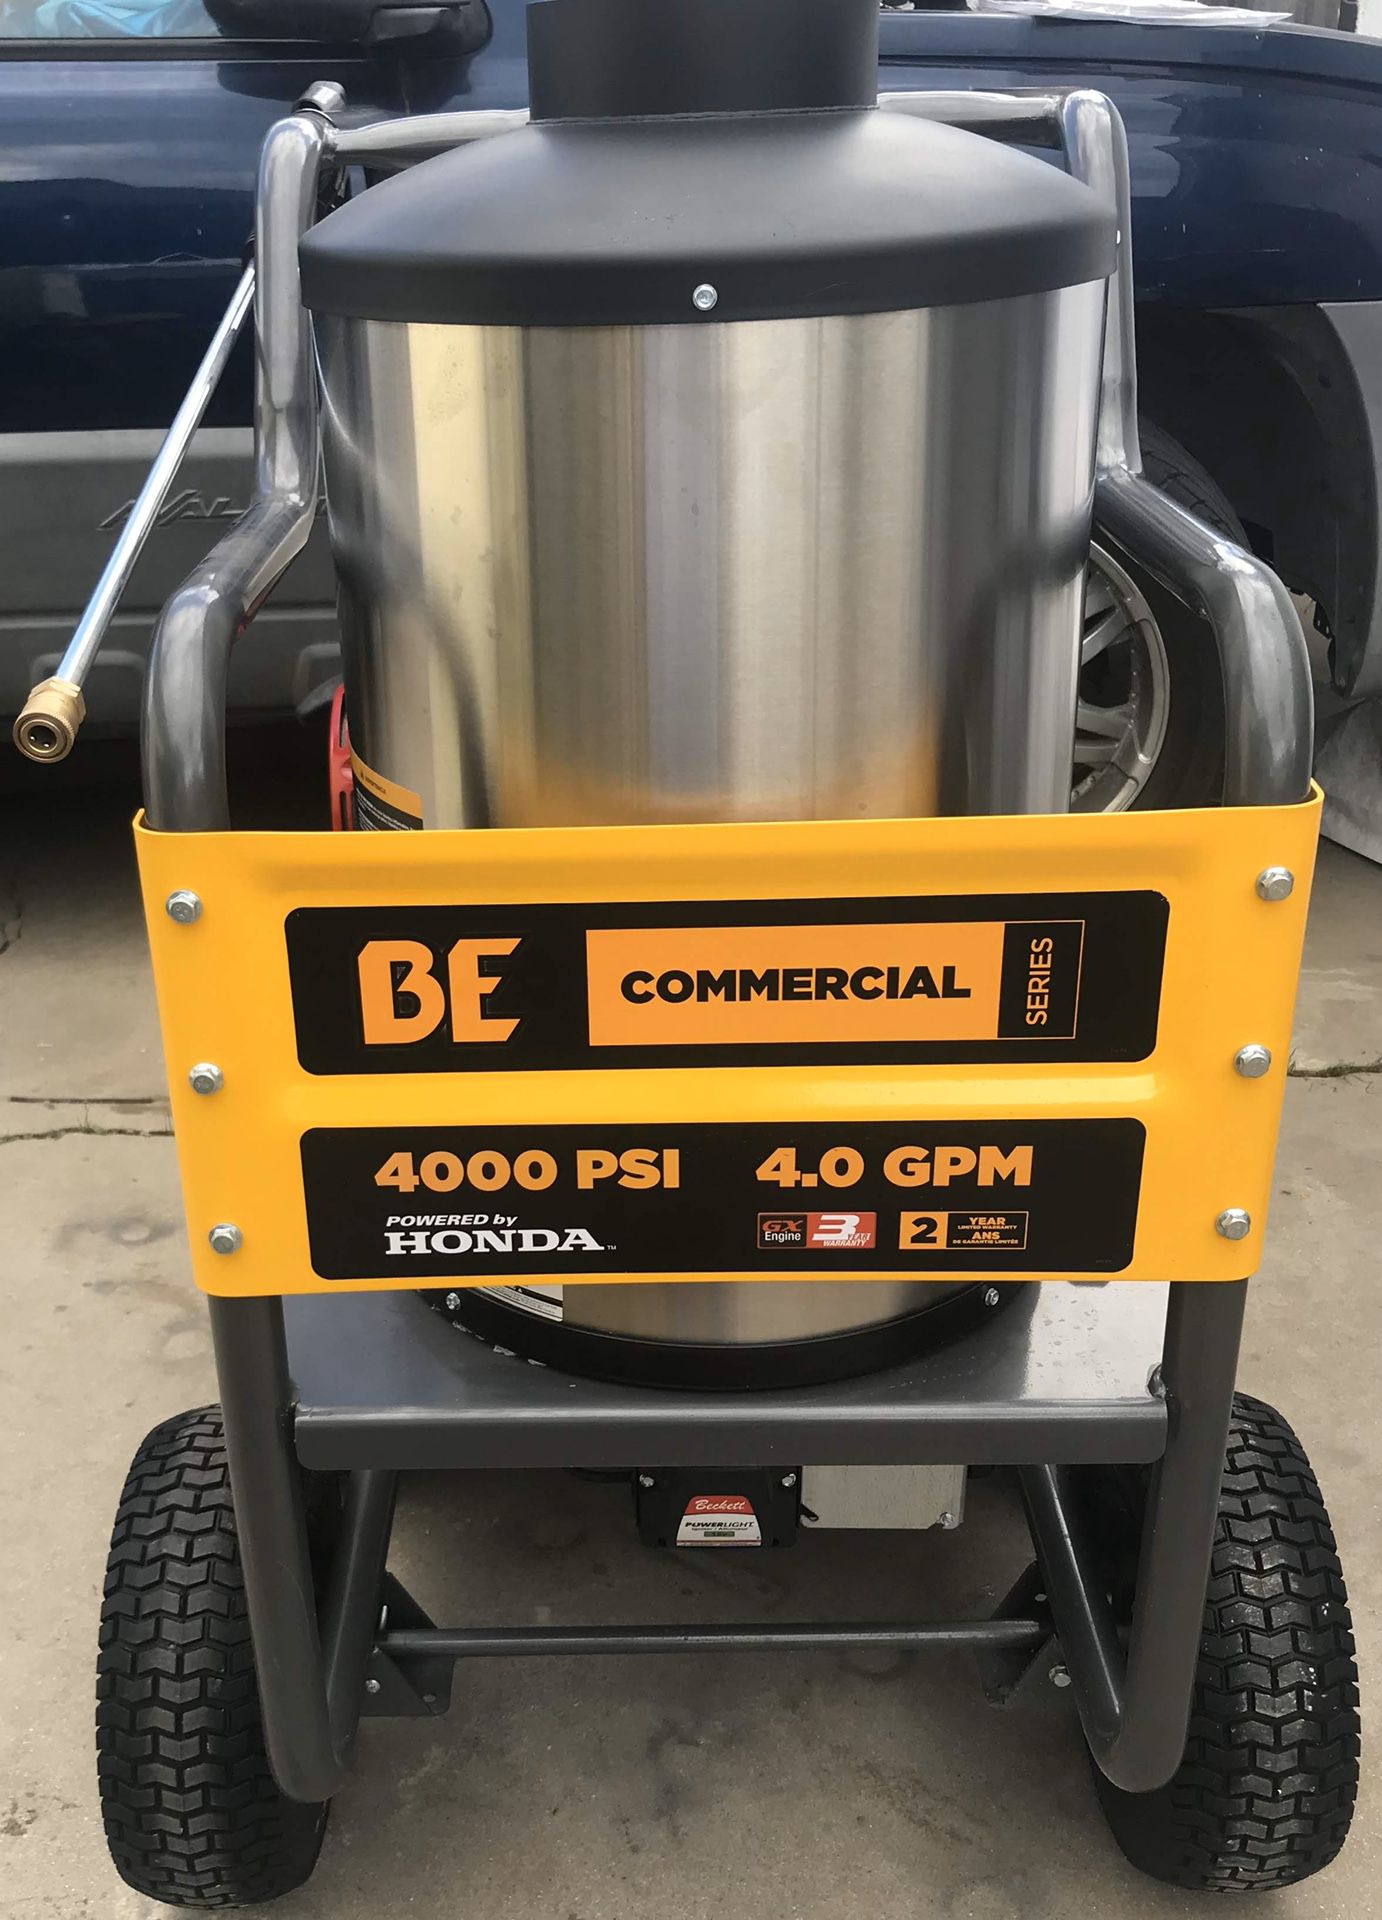 BE Commercial Hot Water Pressure Washer